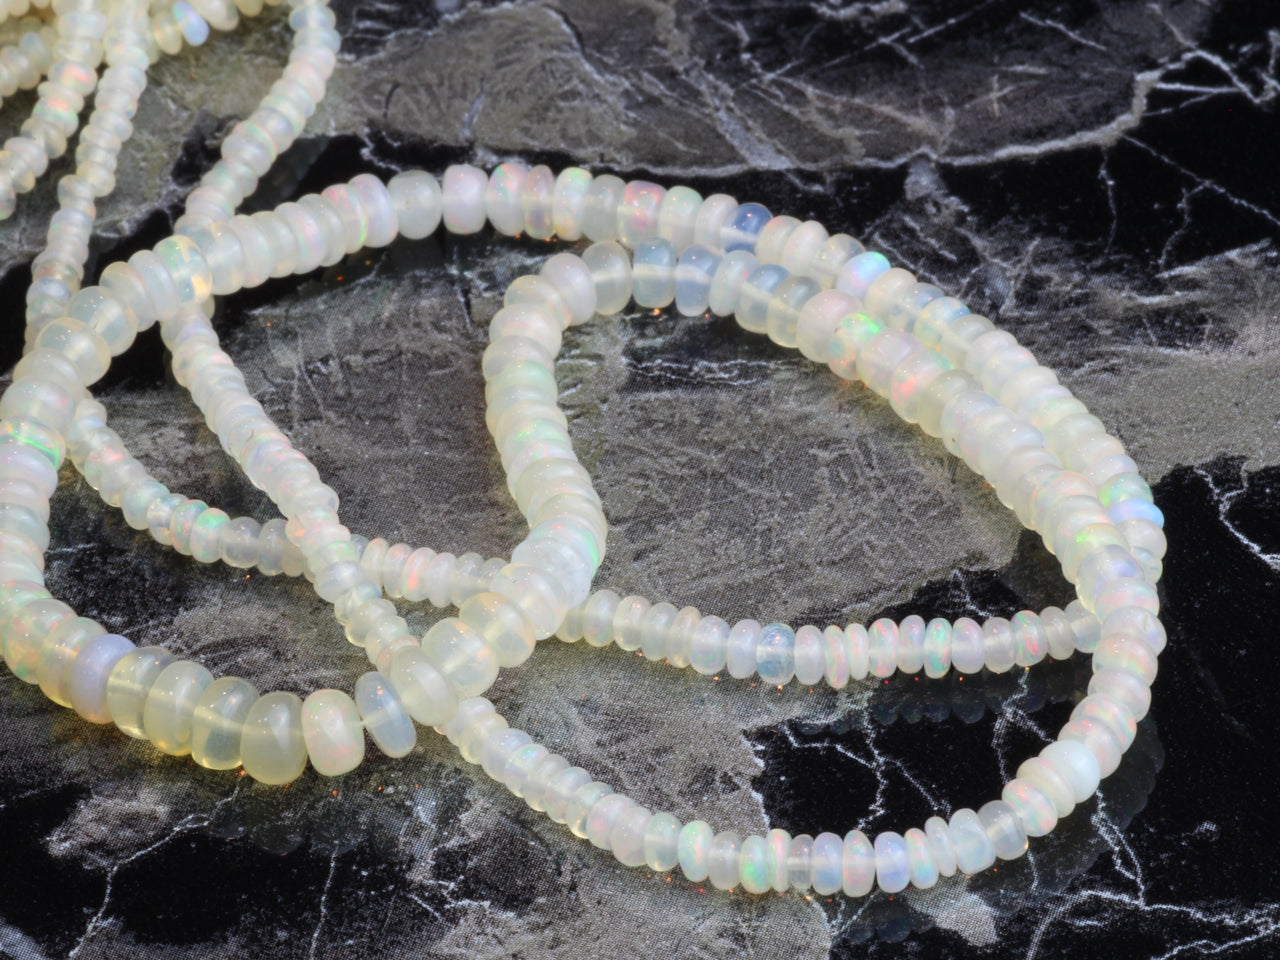 White Ethiopian Opal 3mm - 4.5mm Smooth Rondelles Bead Strand